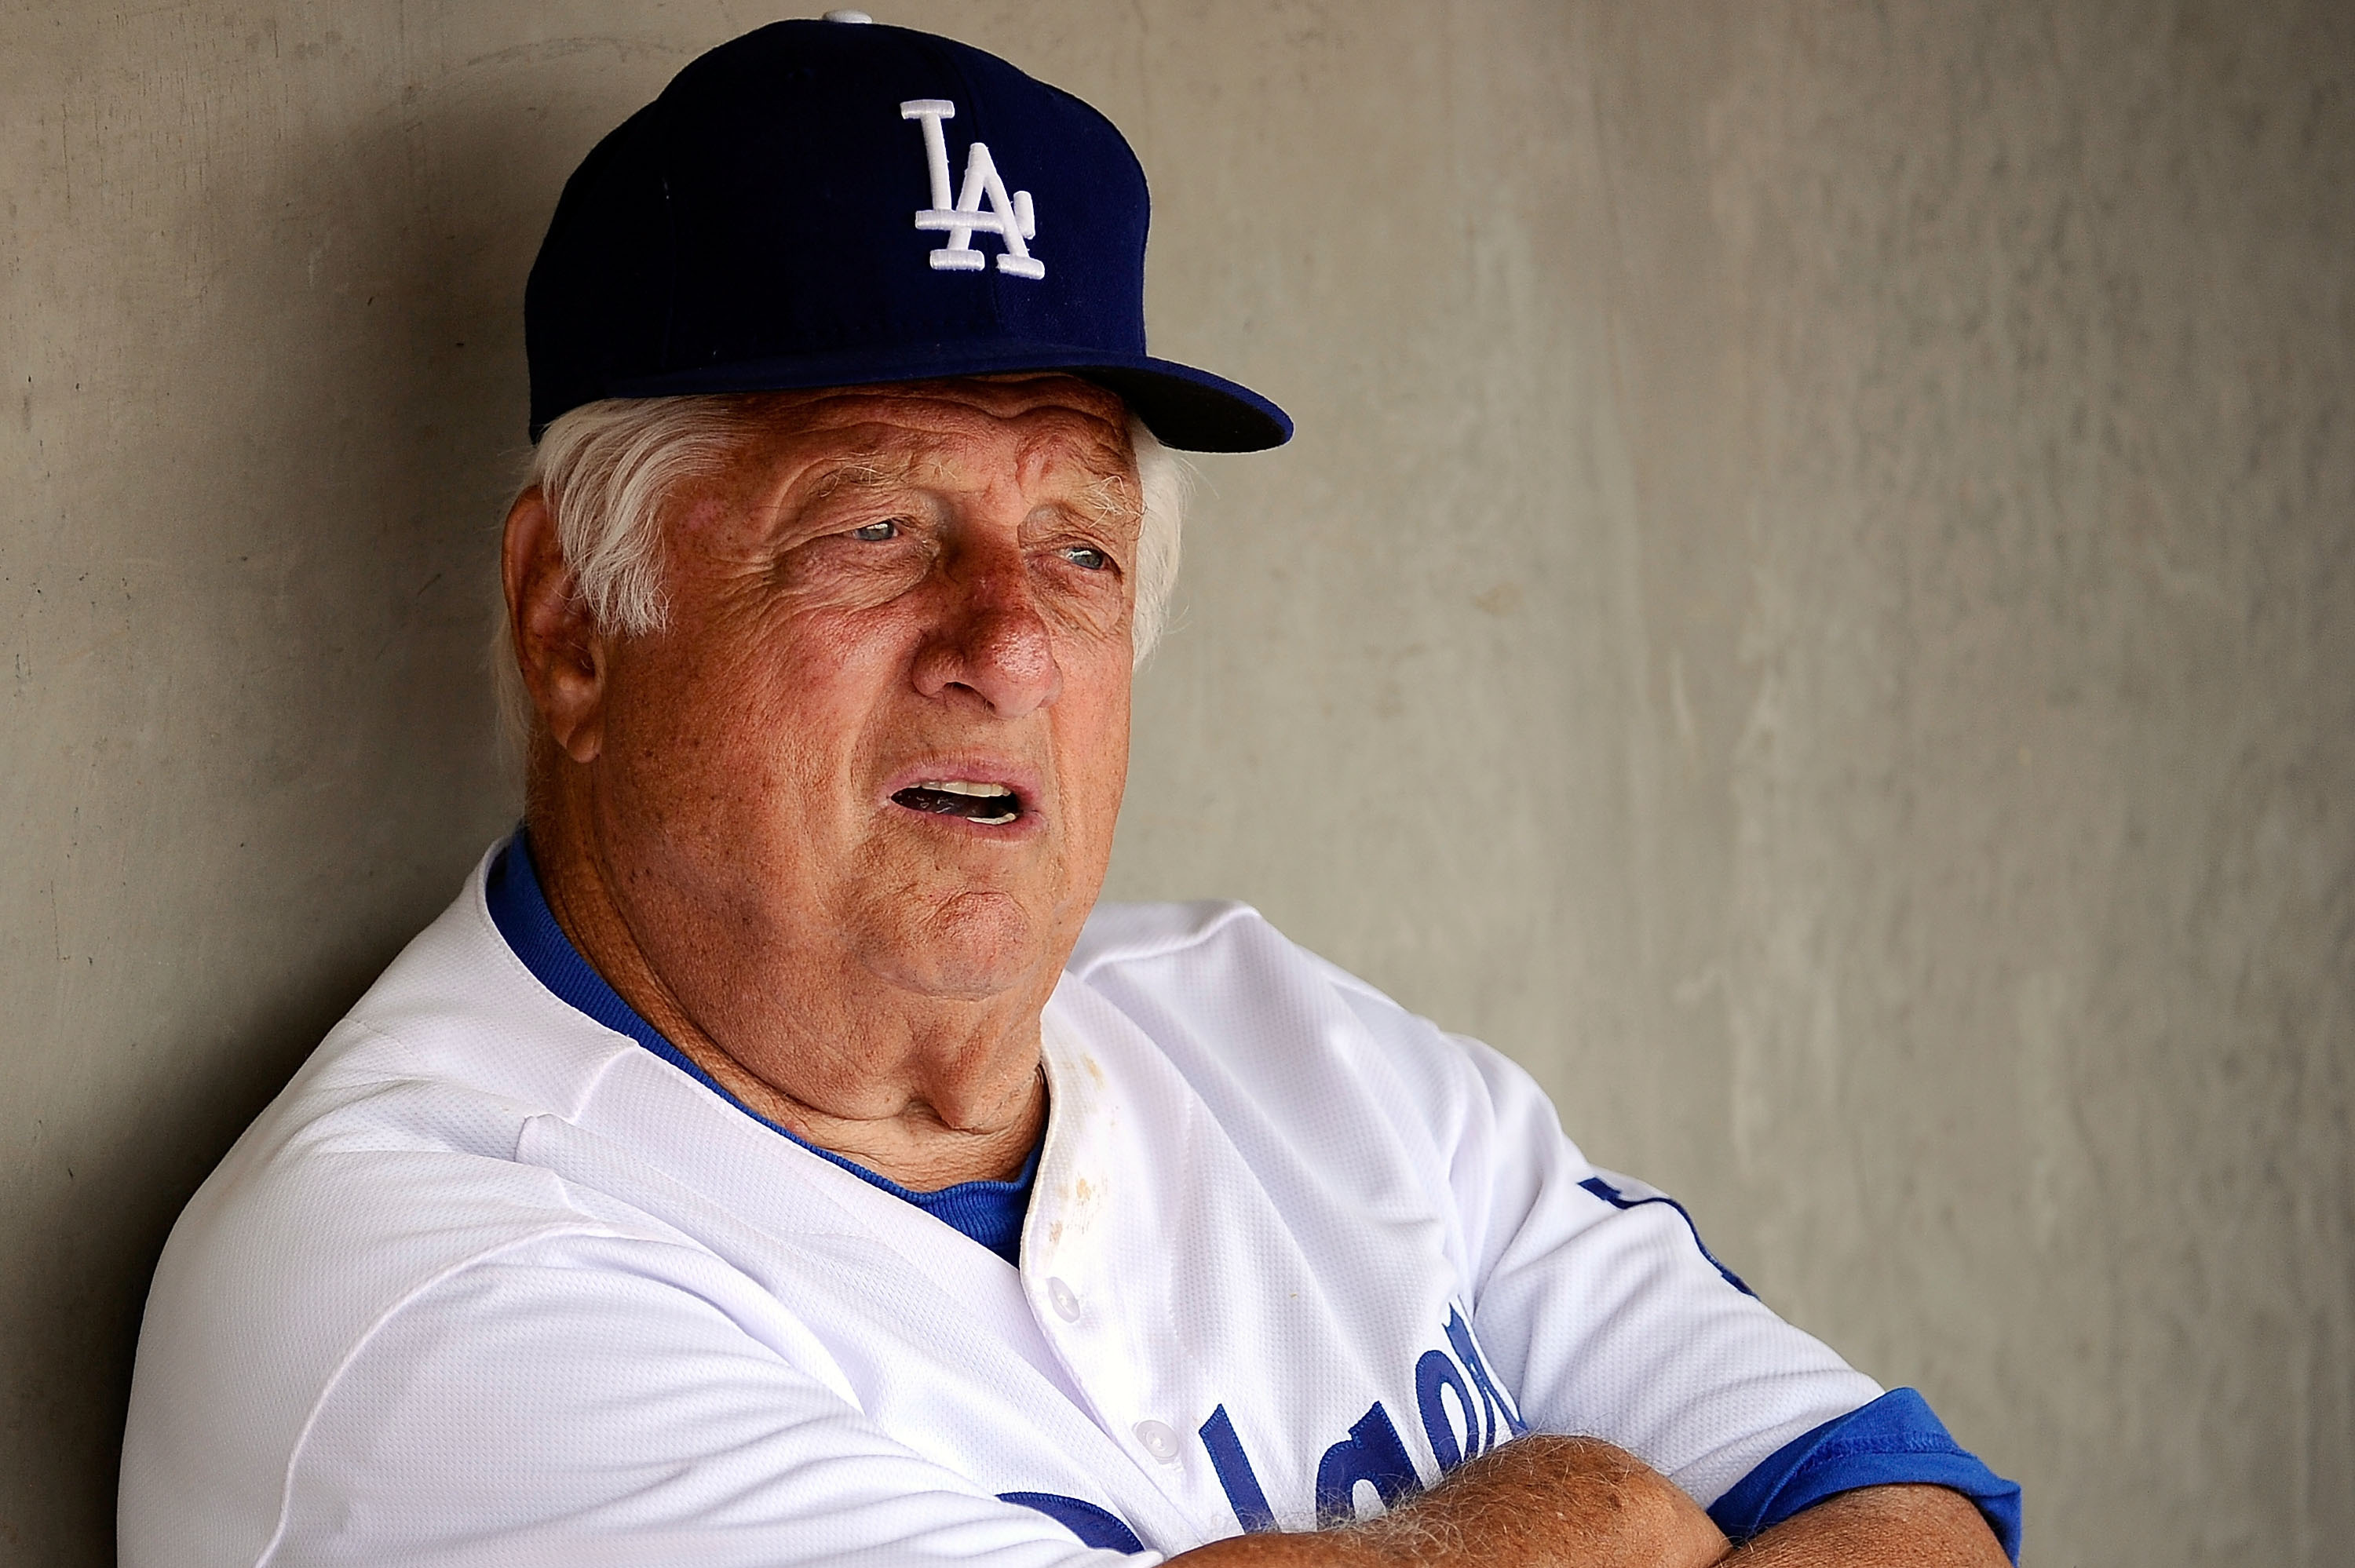 Dodgers Dugout: The 25 greatest Dodgers of all time, No. 23: Ron